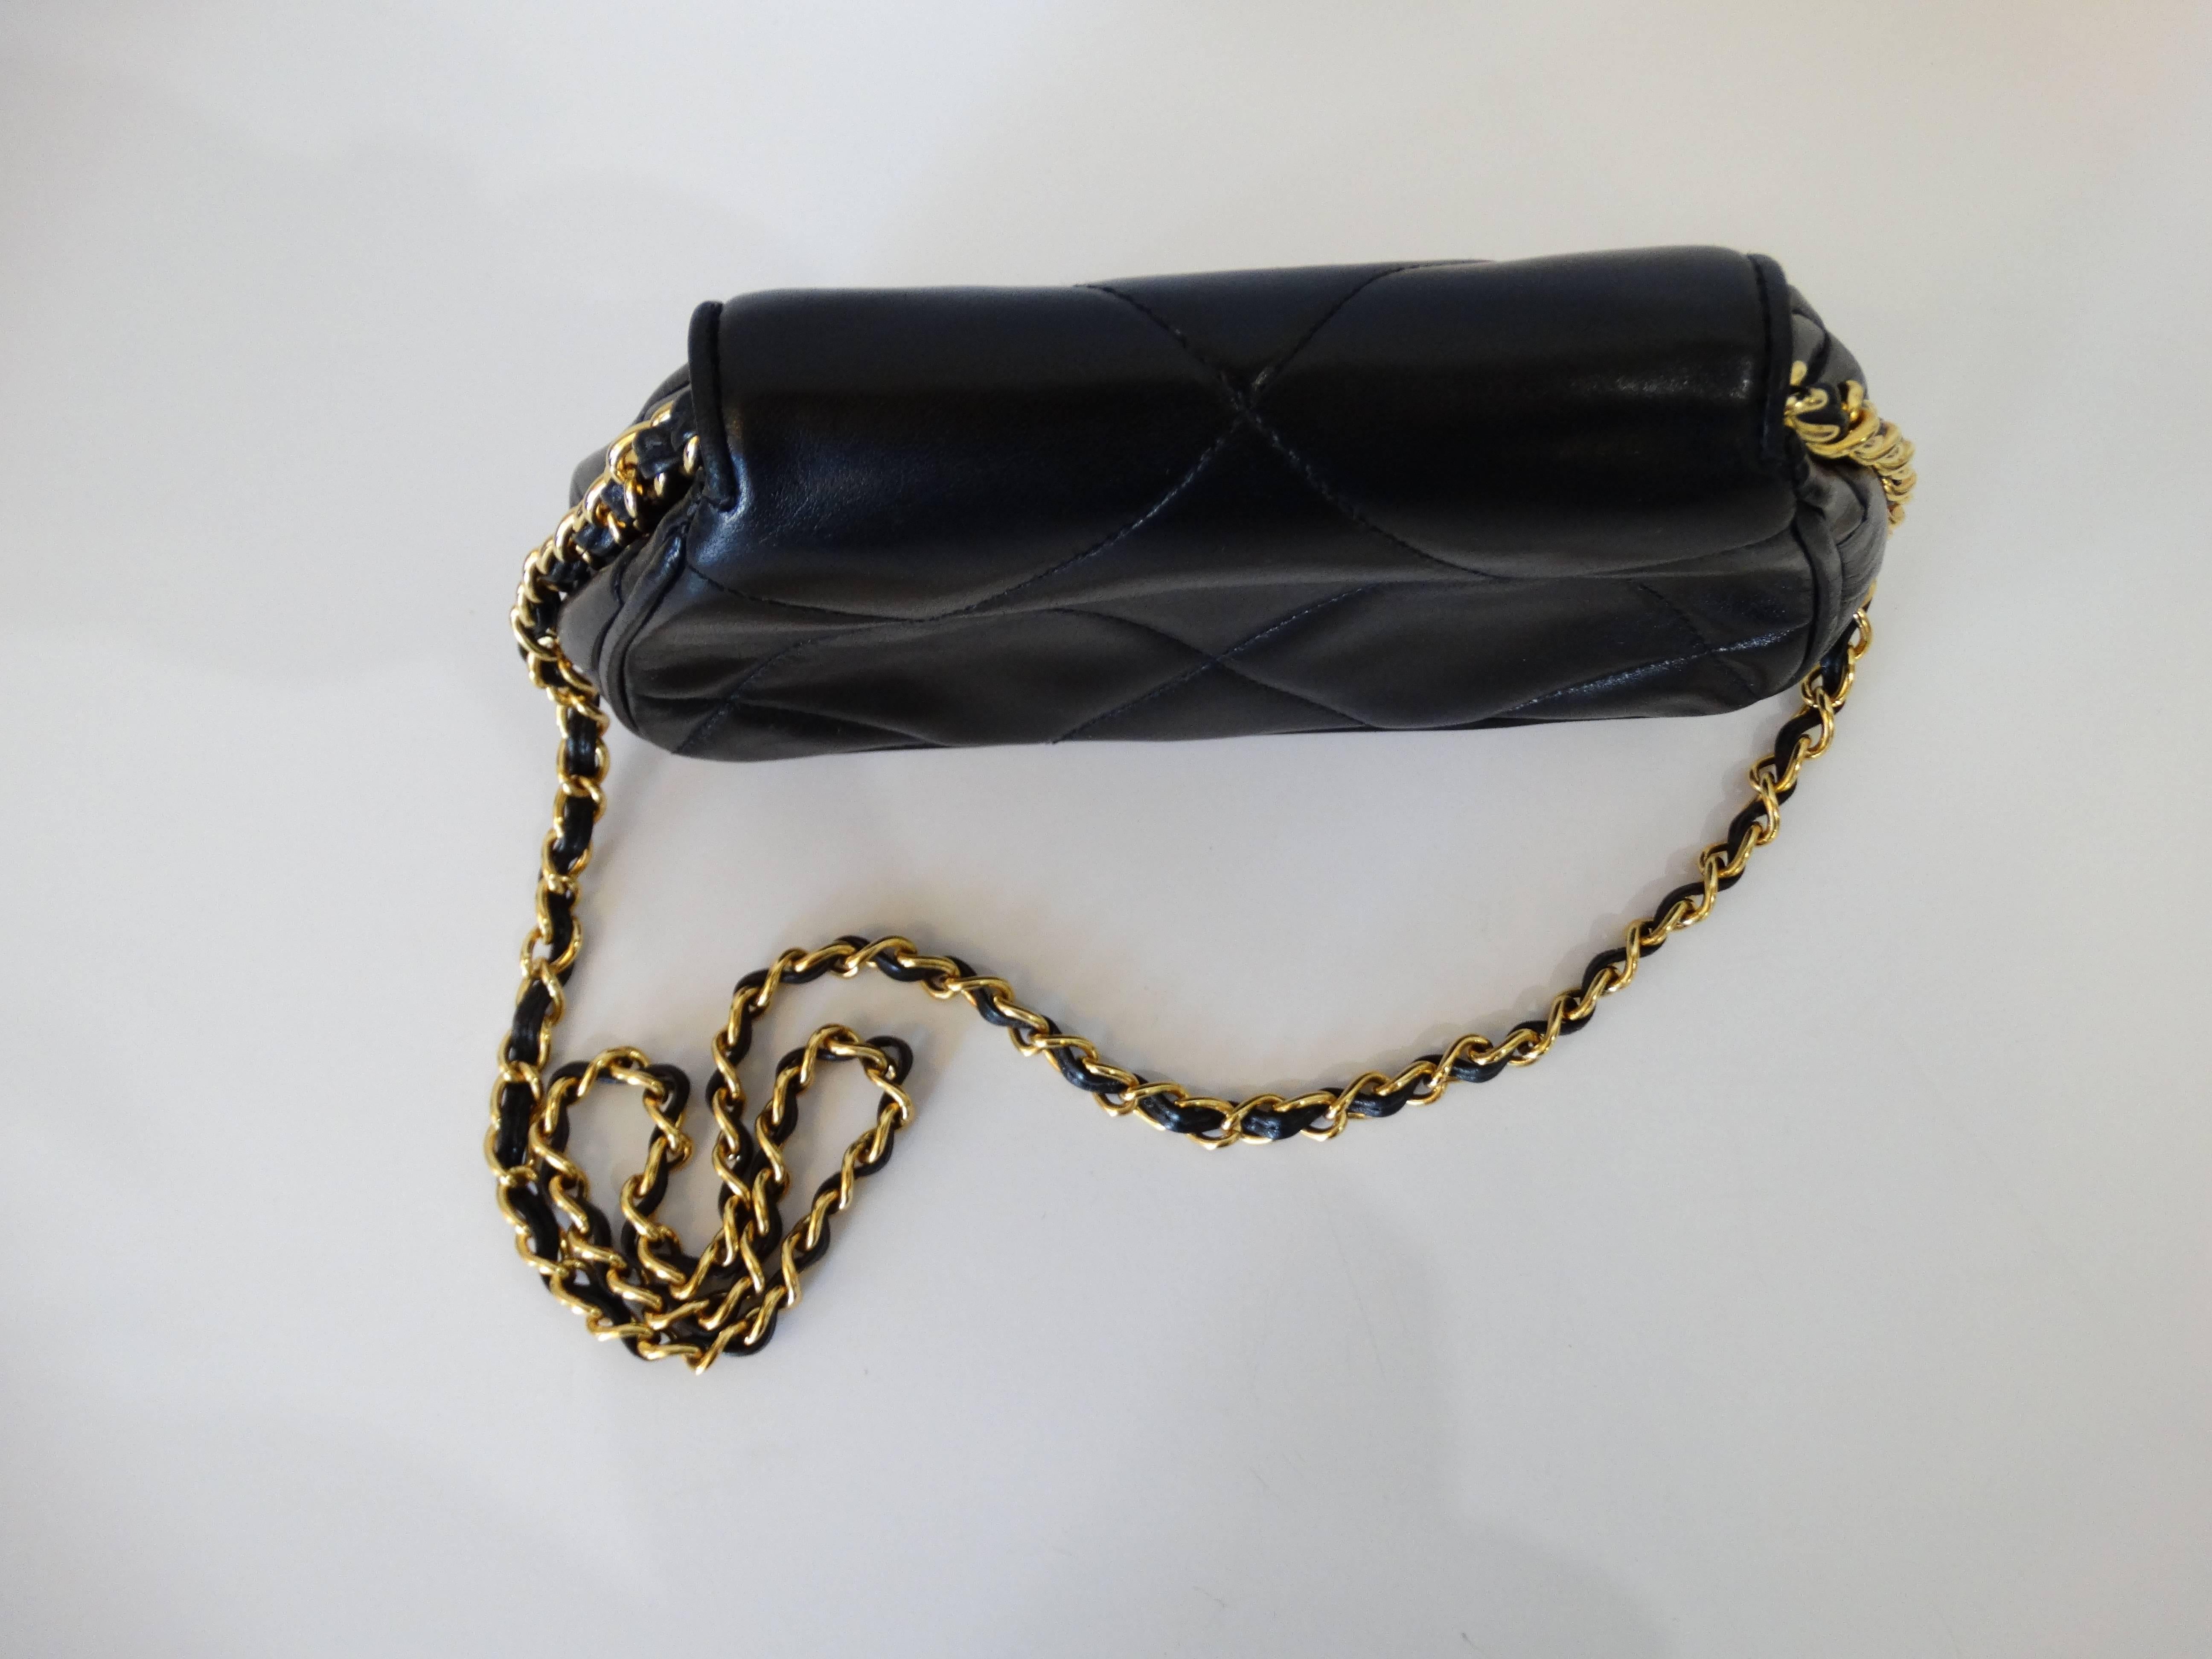 Rare 1990s Chanel Black Lambskin Quilted Mini Bag 4